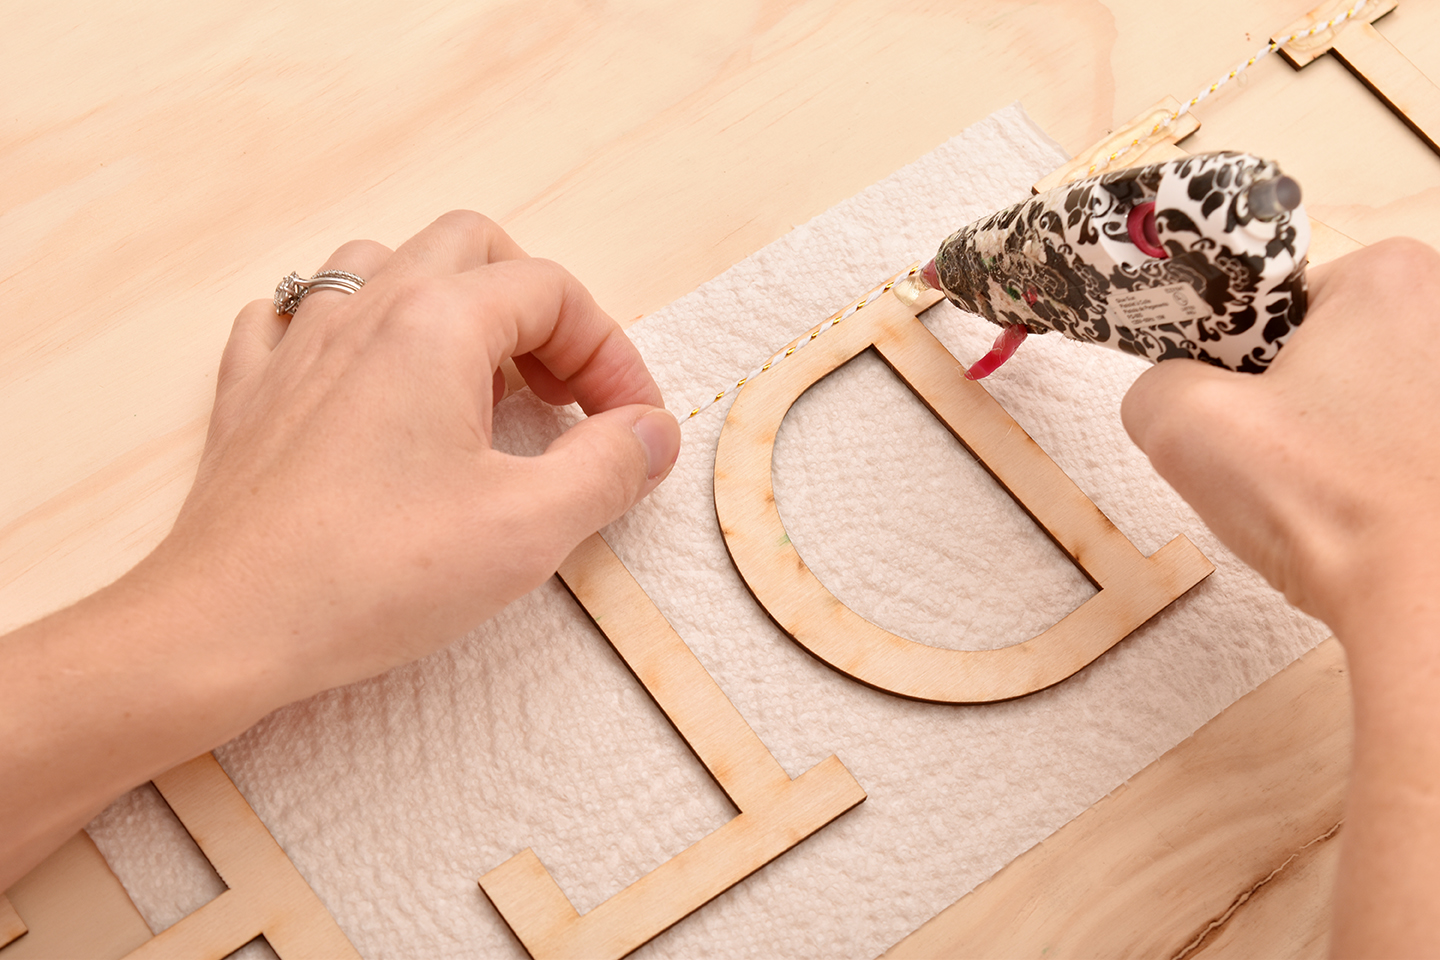 How To Paint Wooden Letters To Make Custom Birthday Decorations /// By Faith Provencher of Design Fixation #birthday #first #party #DIY